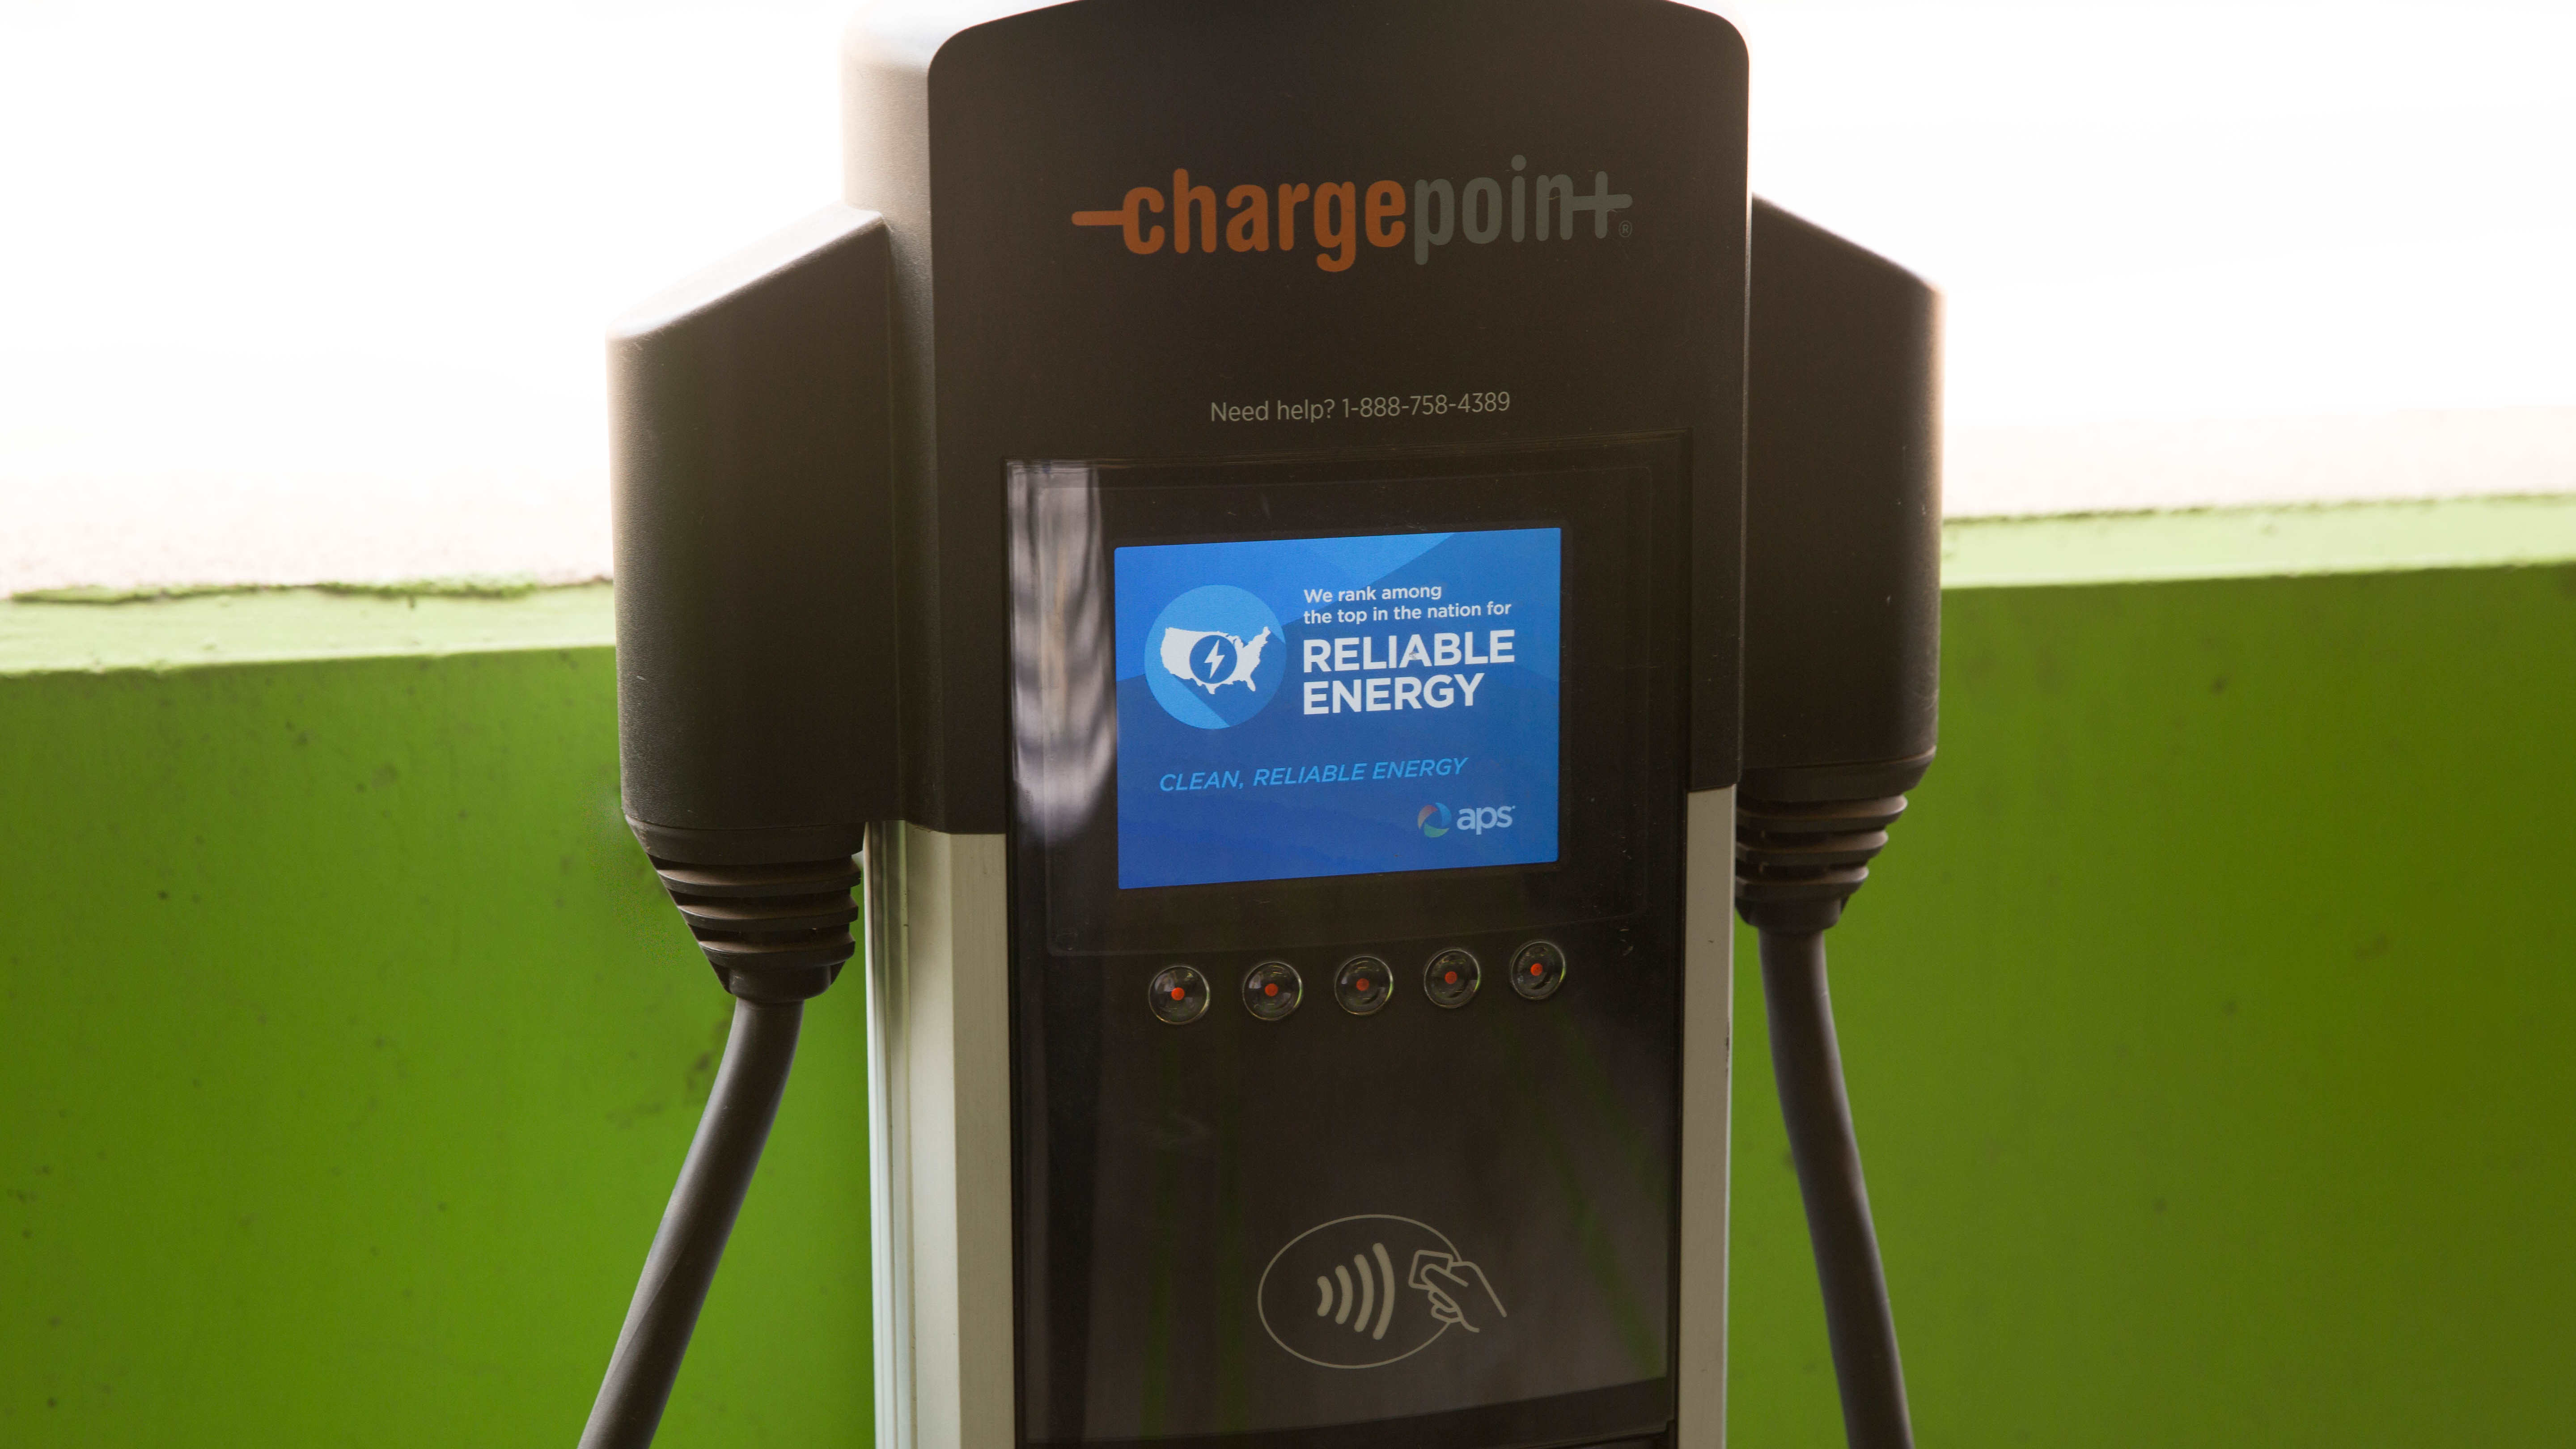 close-up view of a charging station